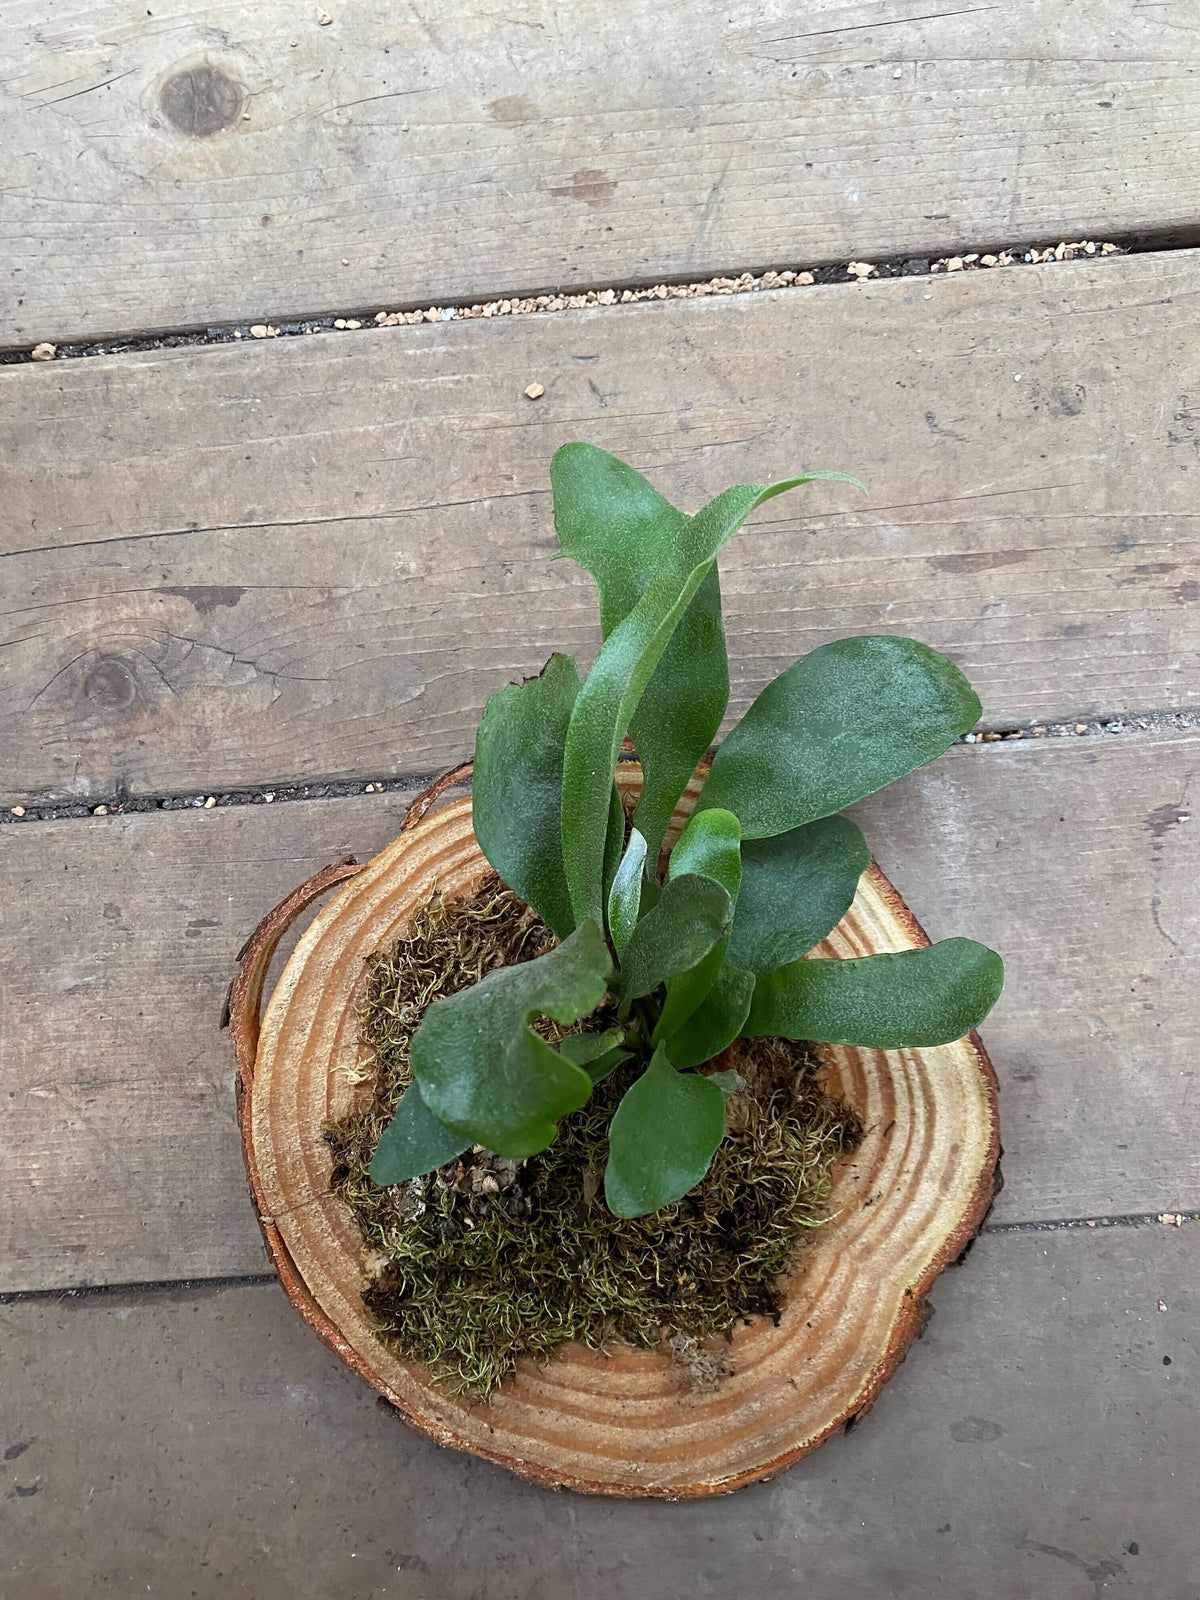 Staghorn Fern Mounting Class - TICKET